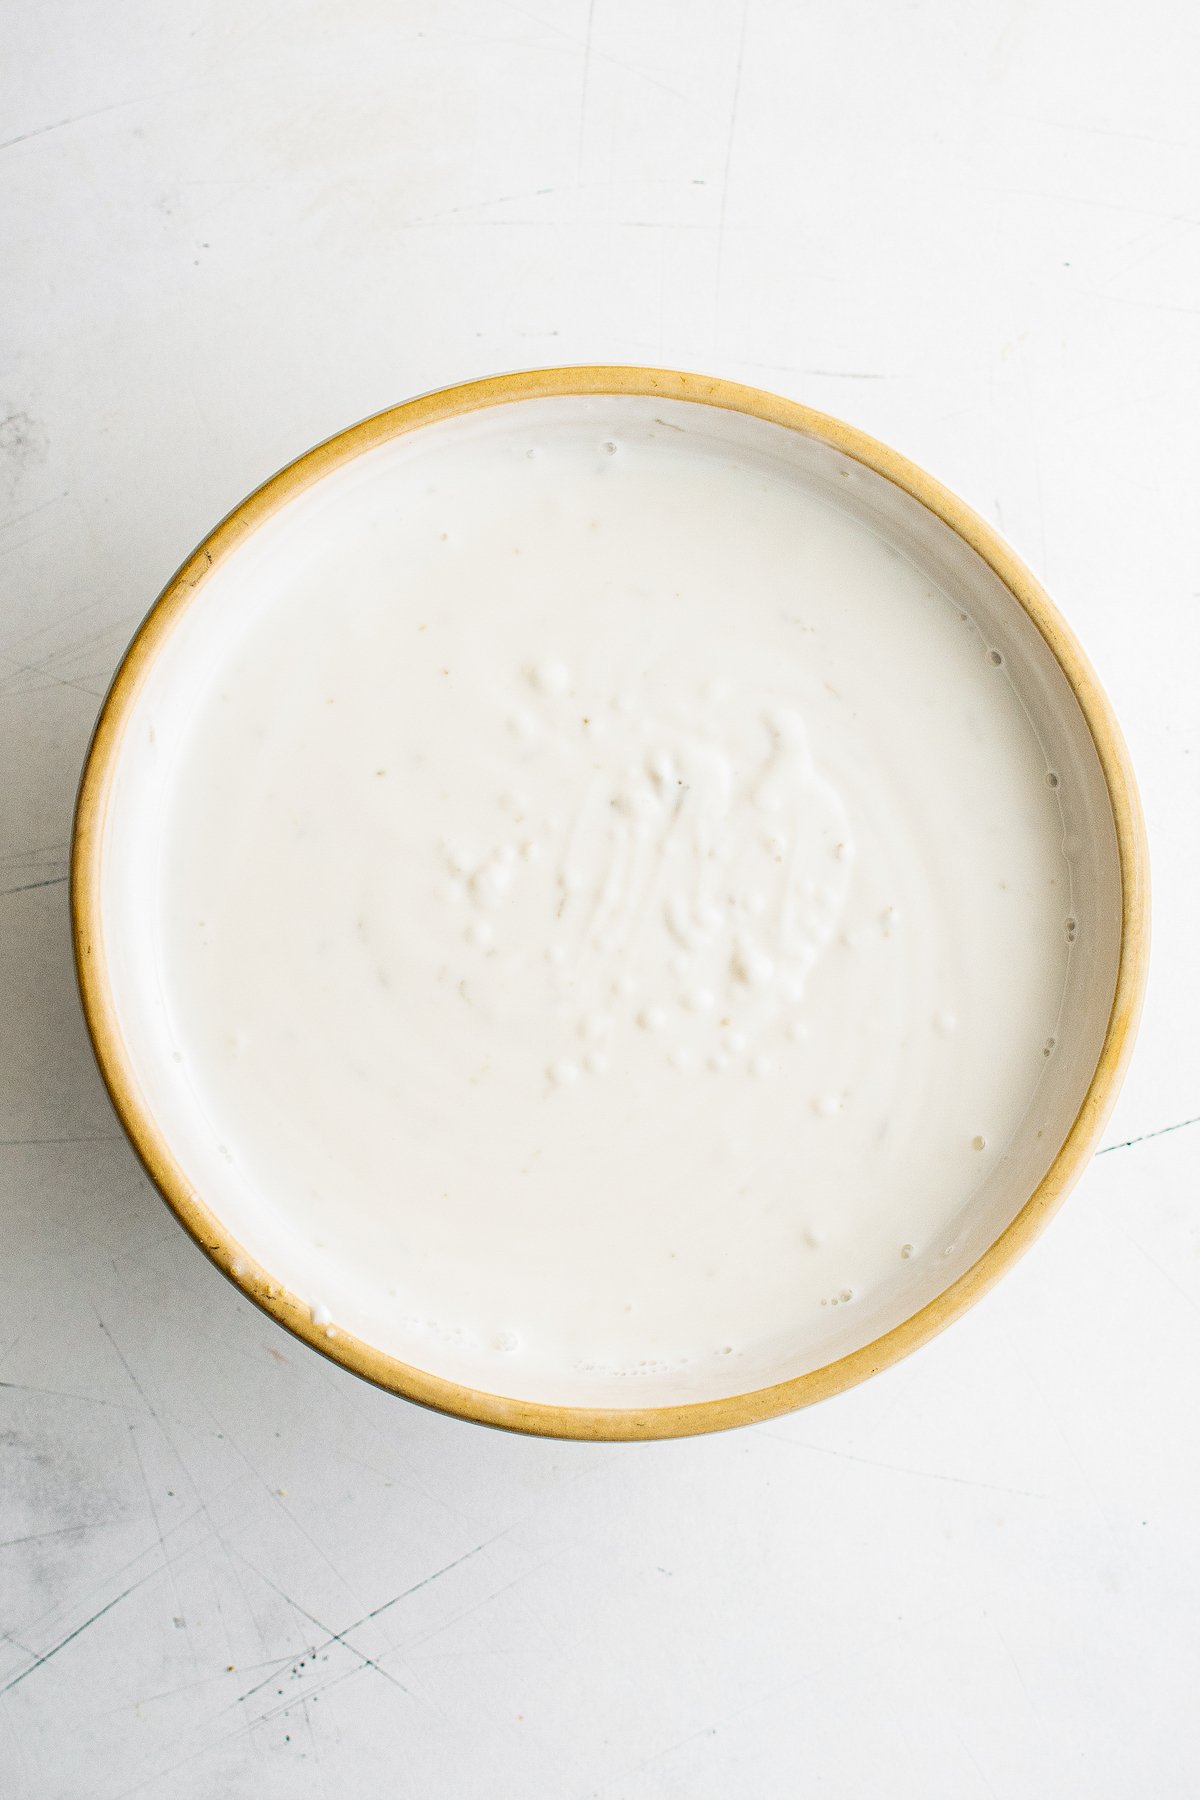 A mixing bowl filled with a lime-yogurt mixture.